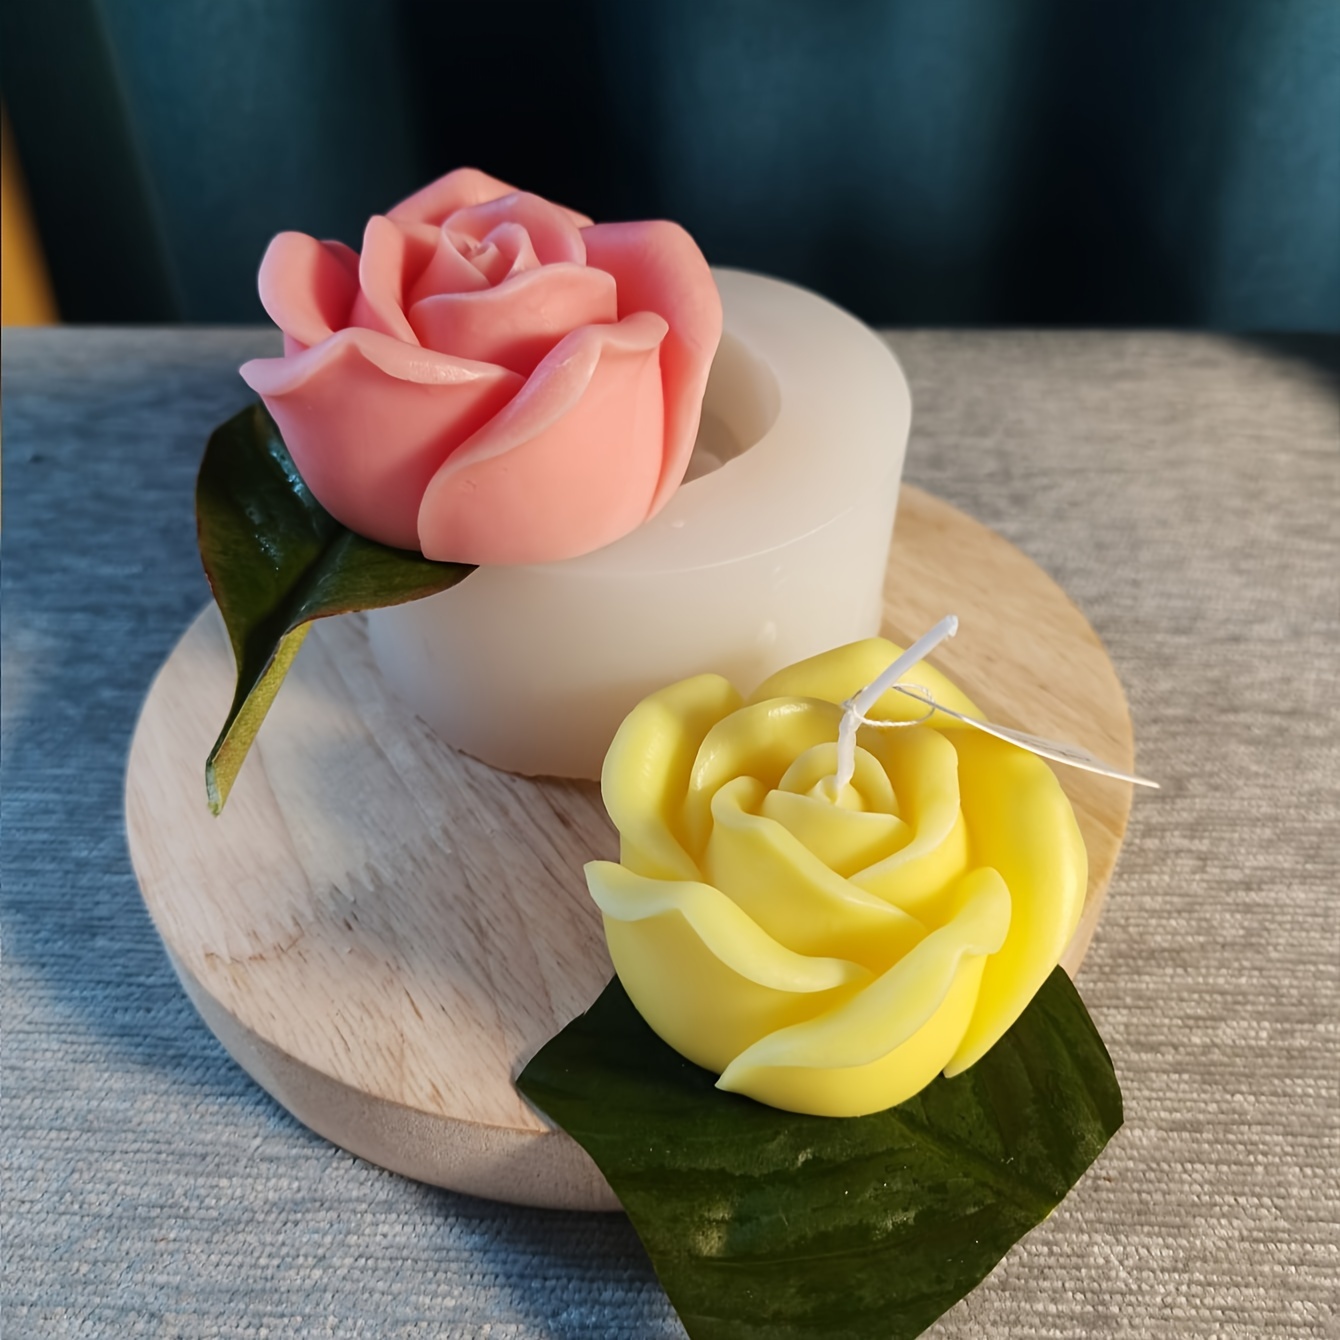 Flower Bloom Rose shape Silicone Fondant Soap 3D Cake Mold Cupcake Jelly  Candy Chocolate Decoration Baking Tool Moulds